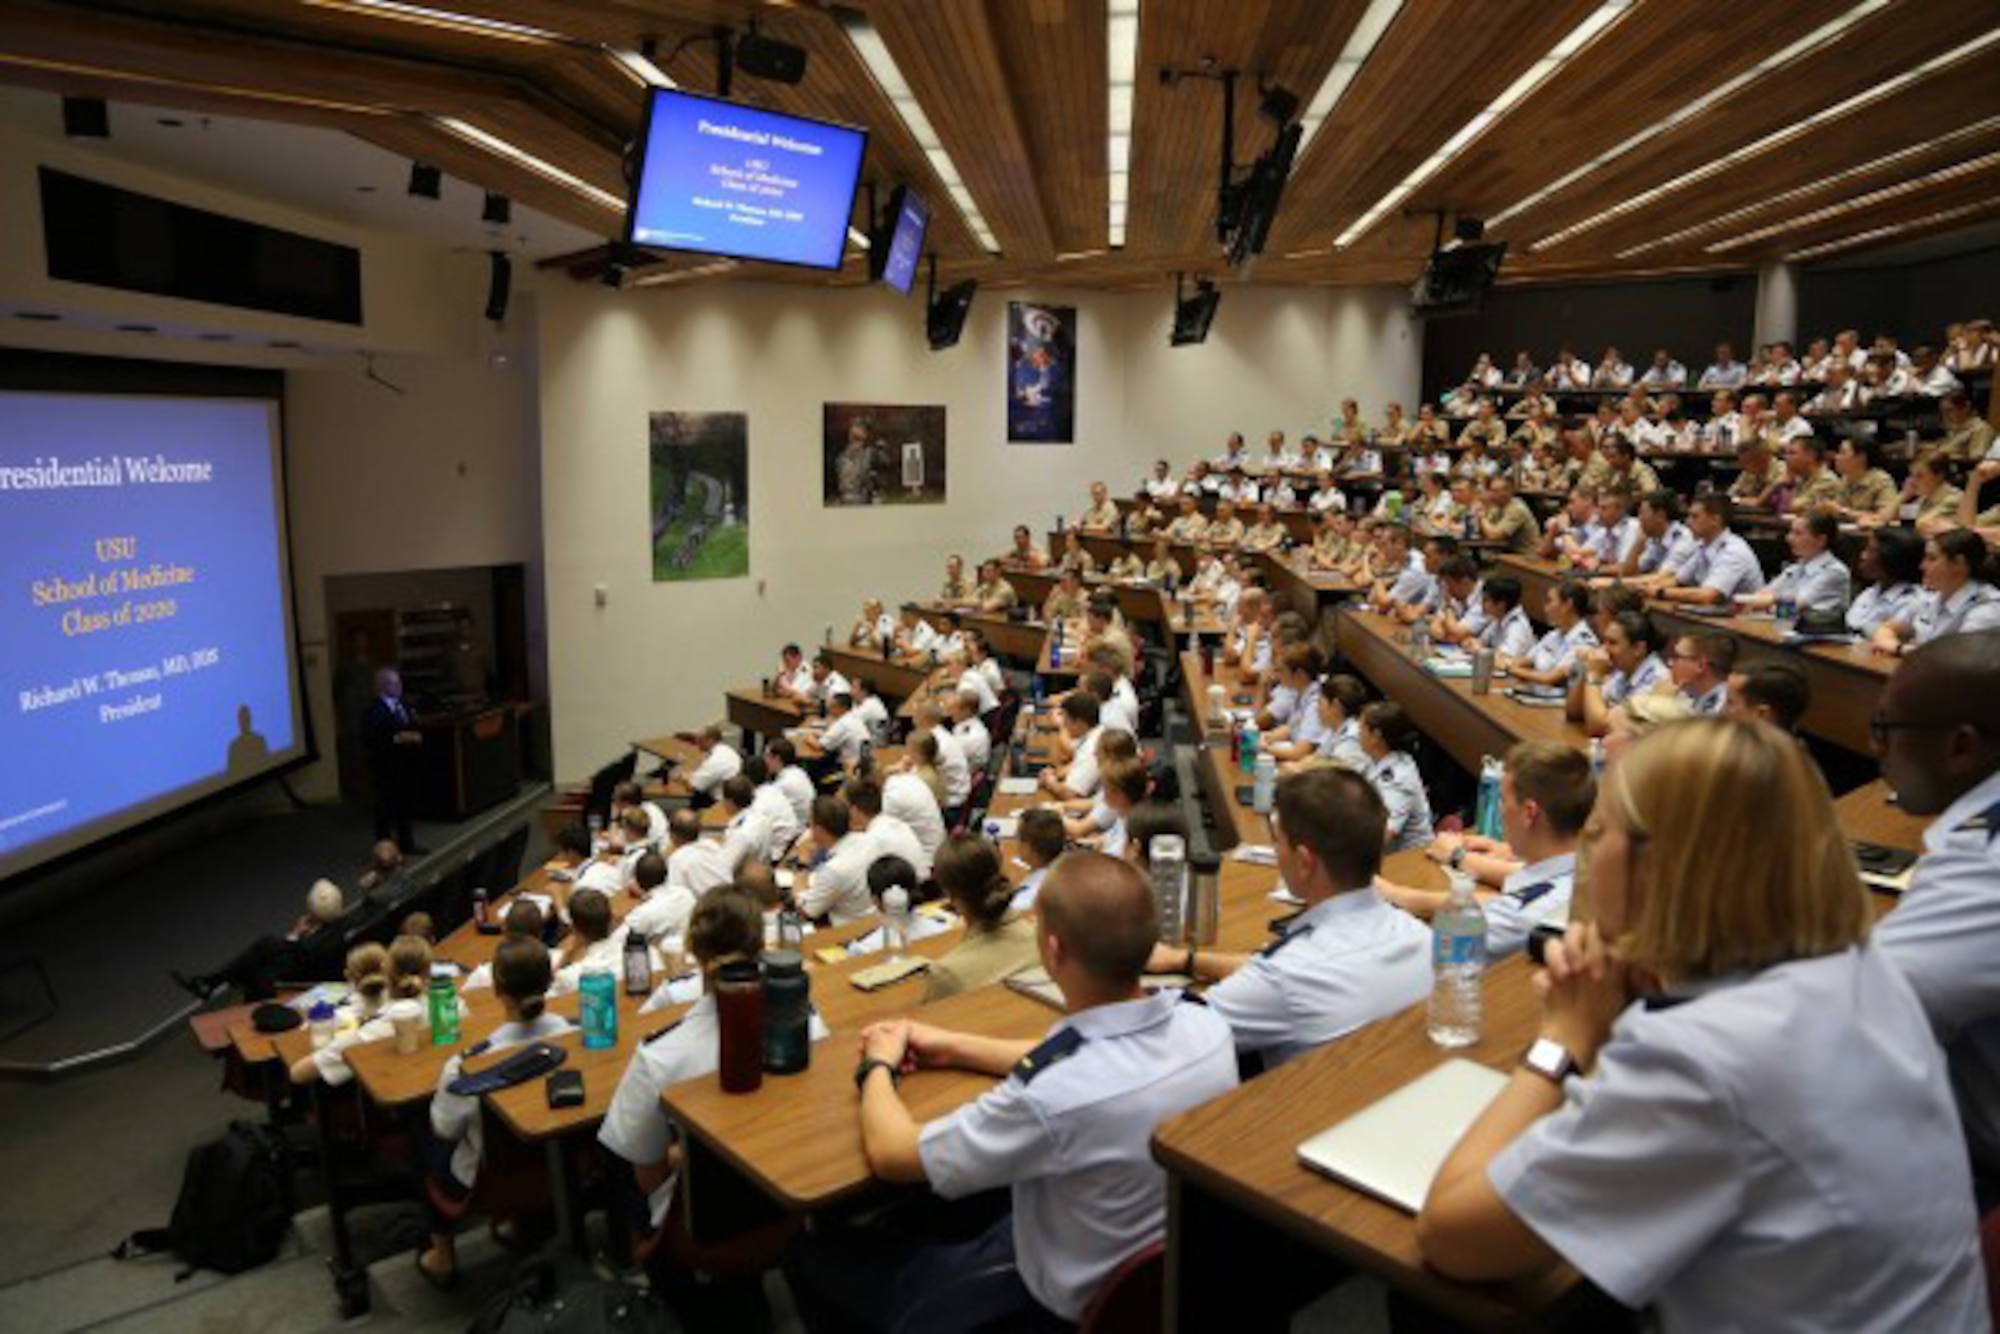 Medical students fill an auditorium lined with wall-mounted screens.